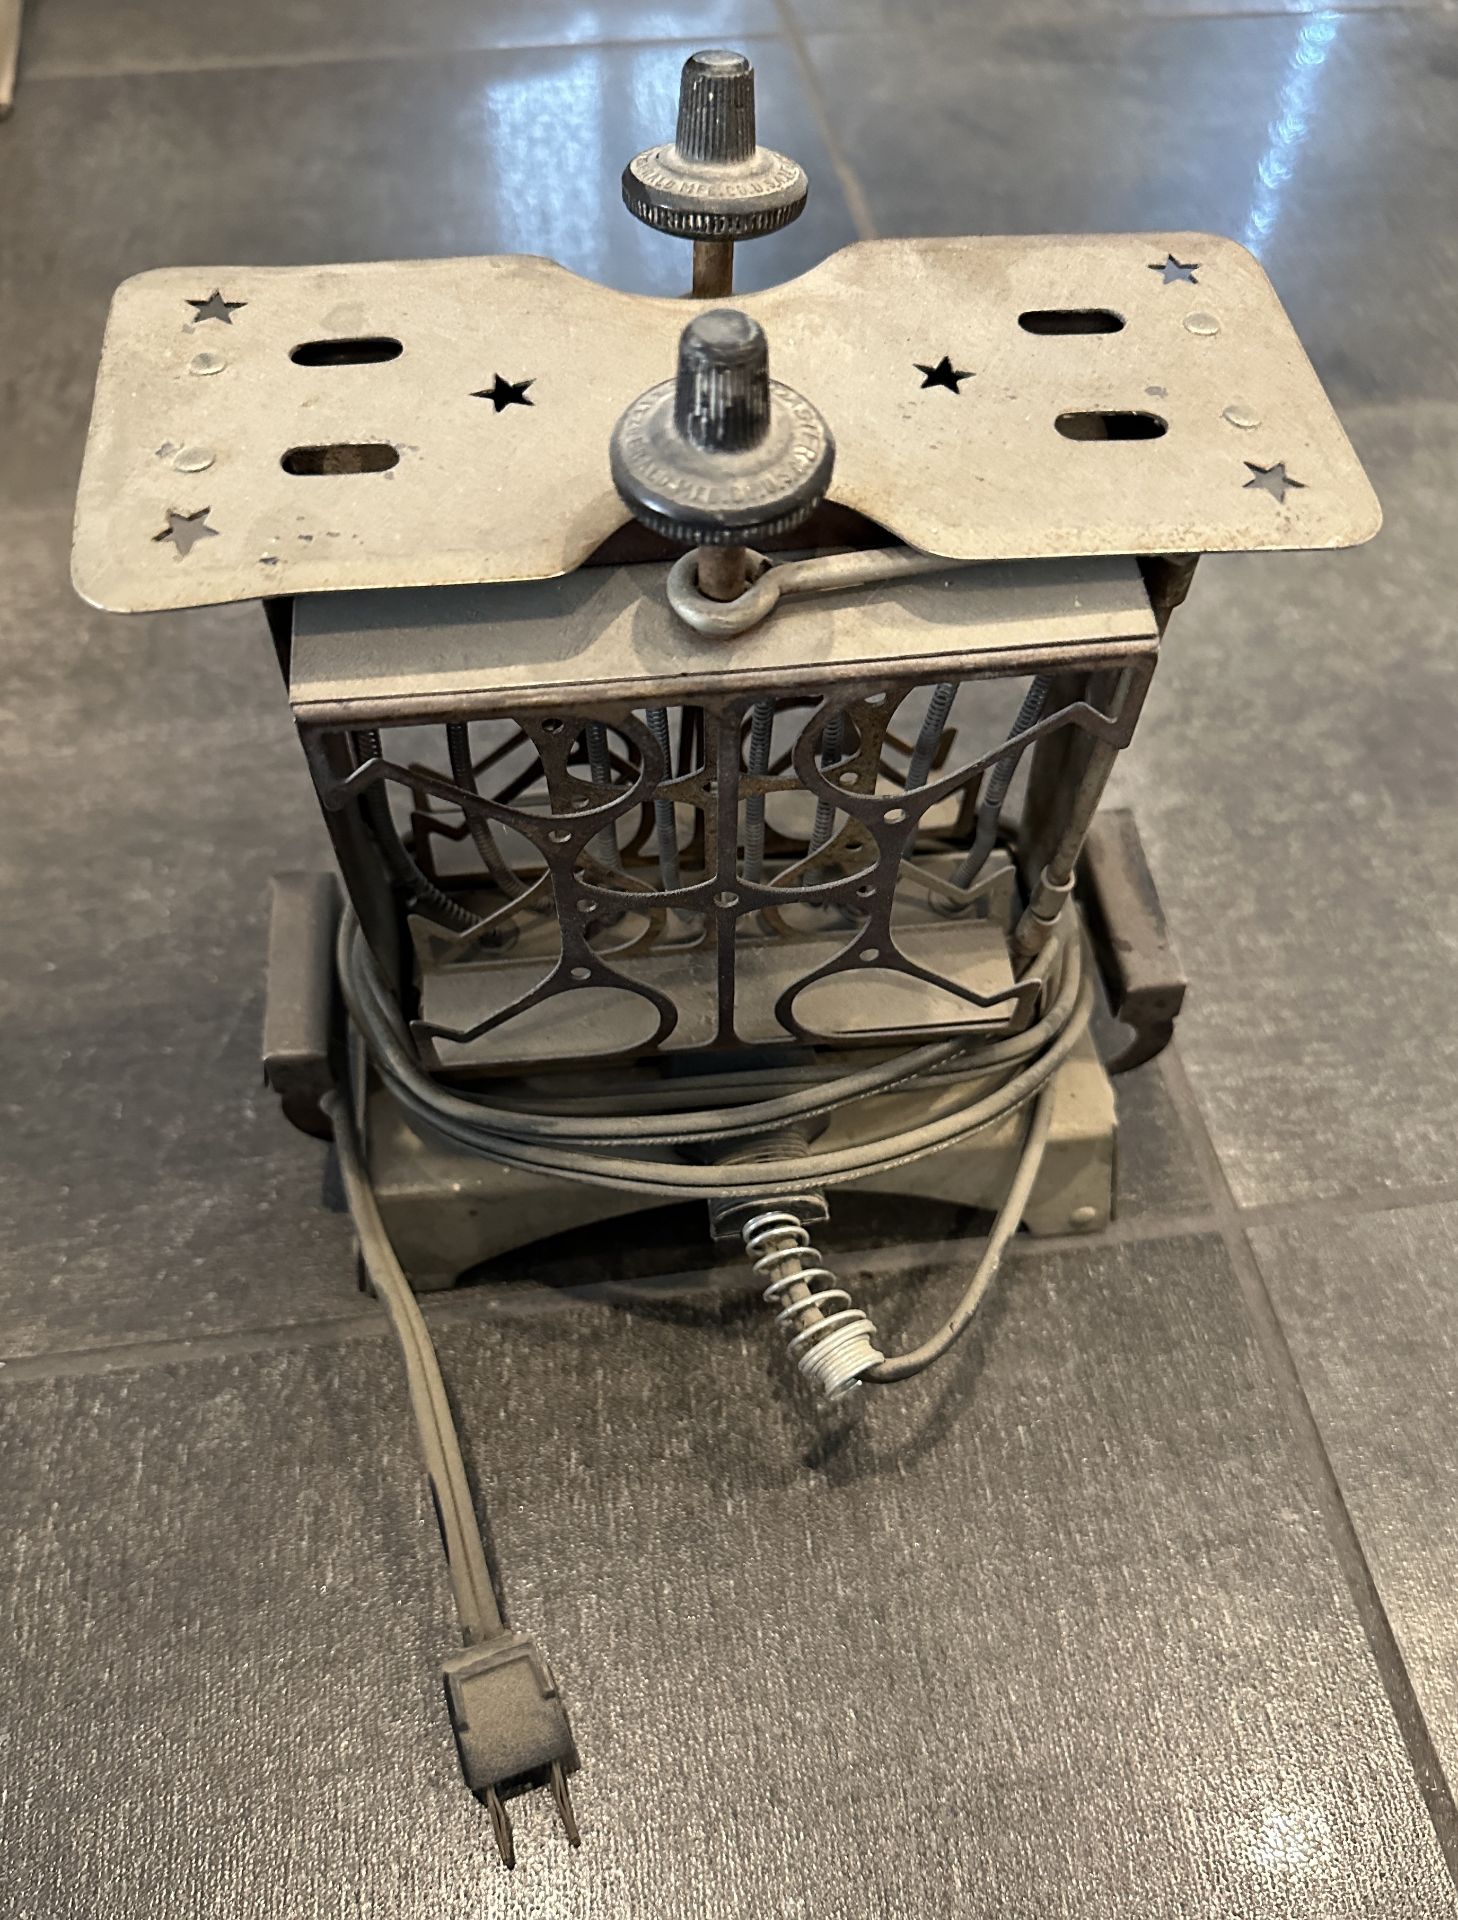 VERY OLD VINTAGE TOASTER , ONE OF THE FIRST EVER INVENTED